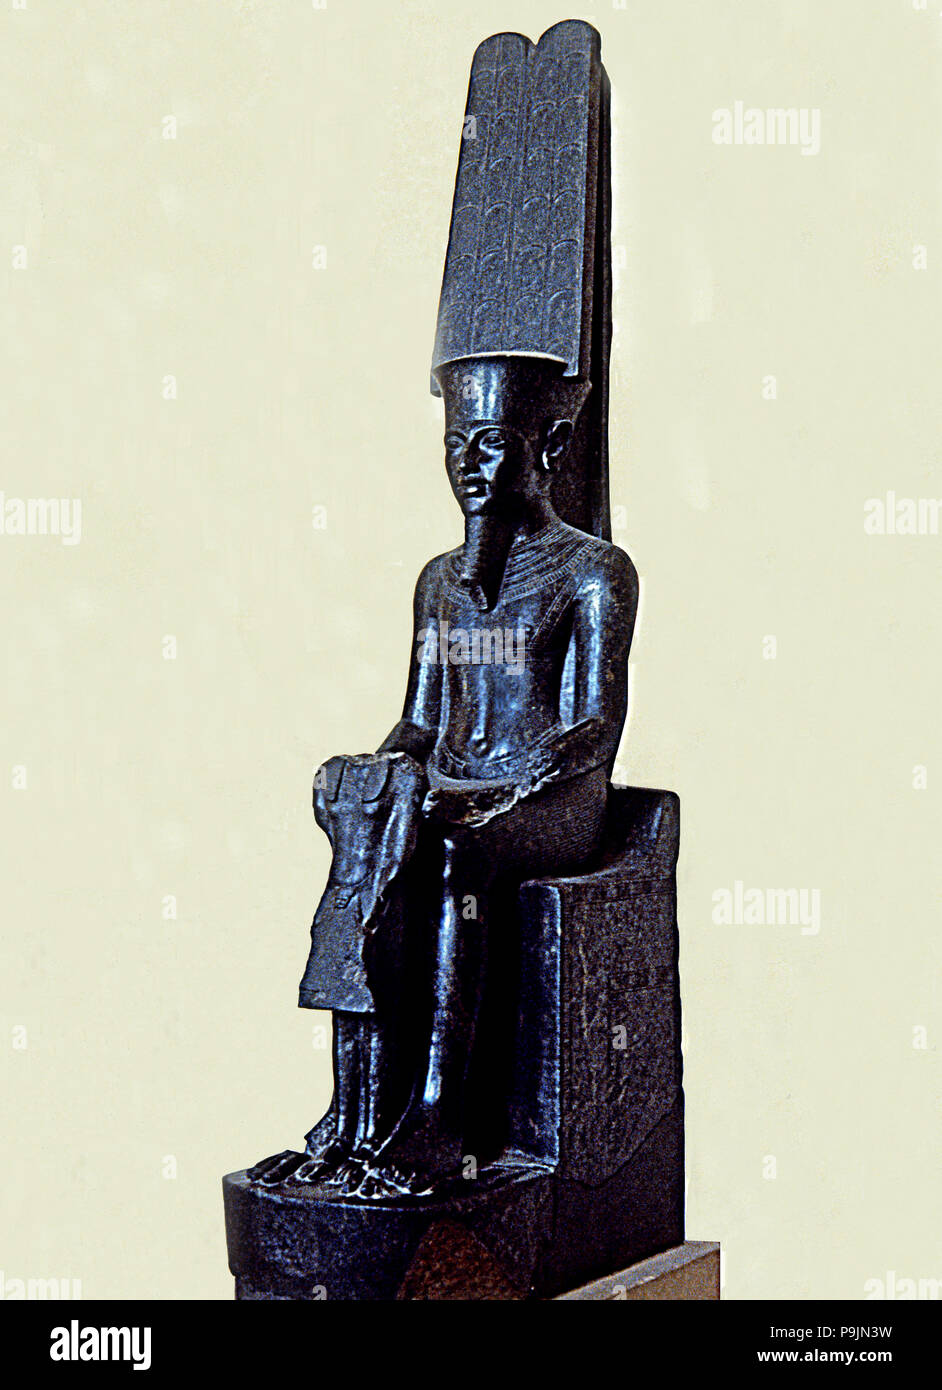 what was the amarna revolution